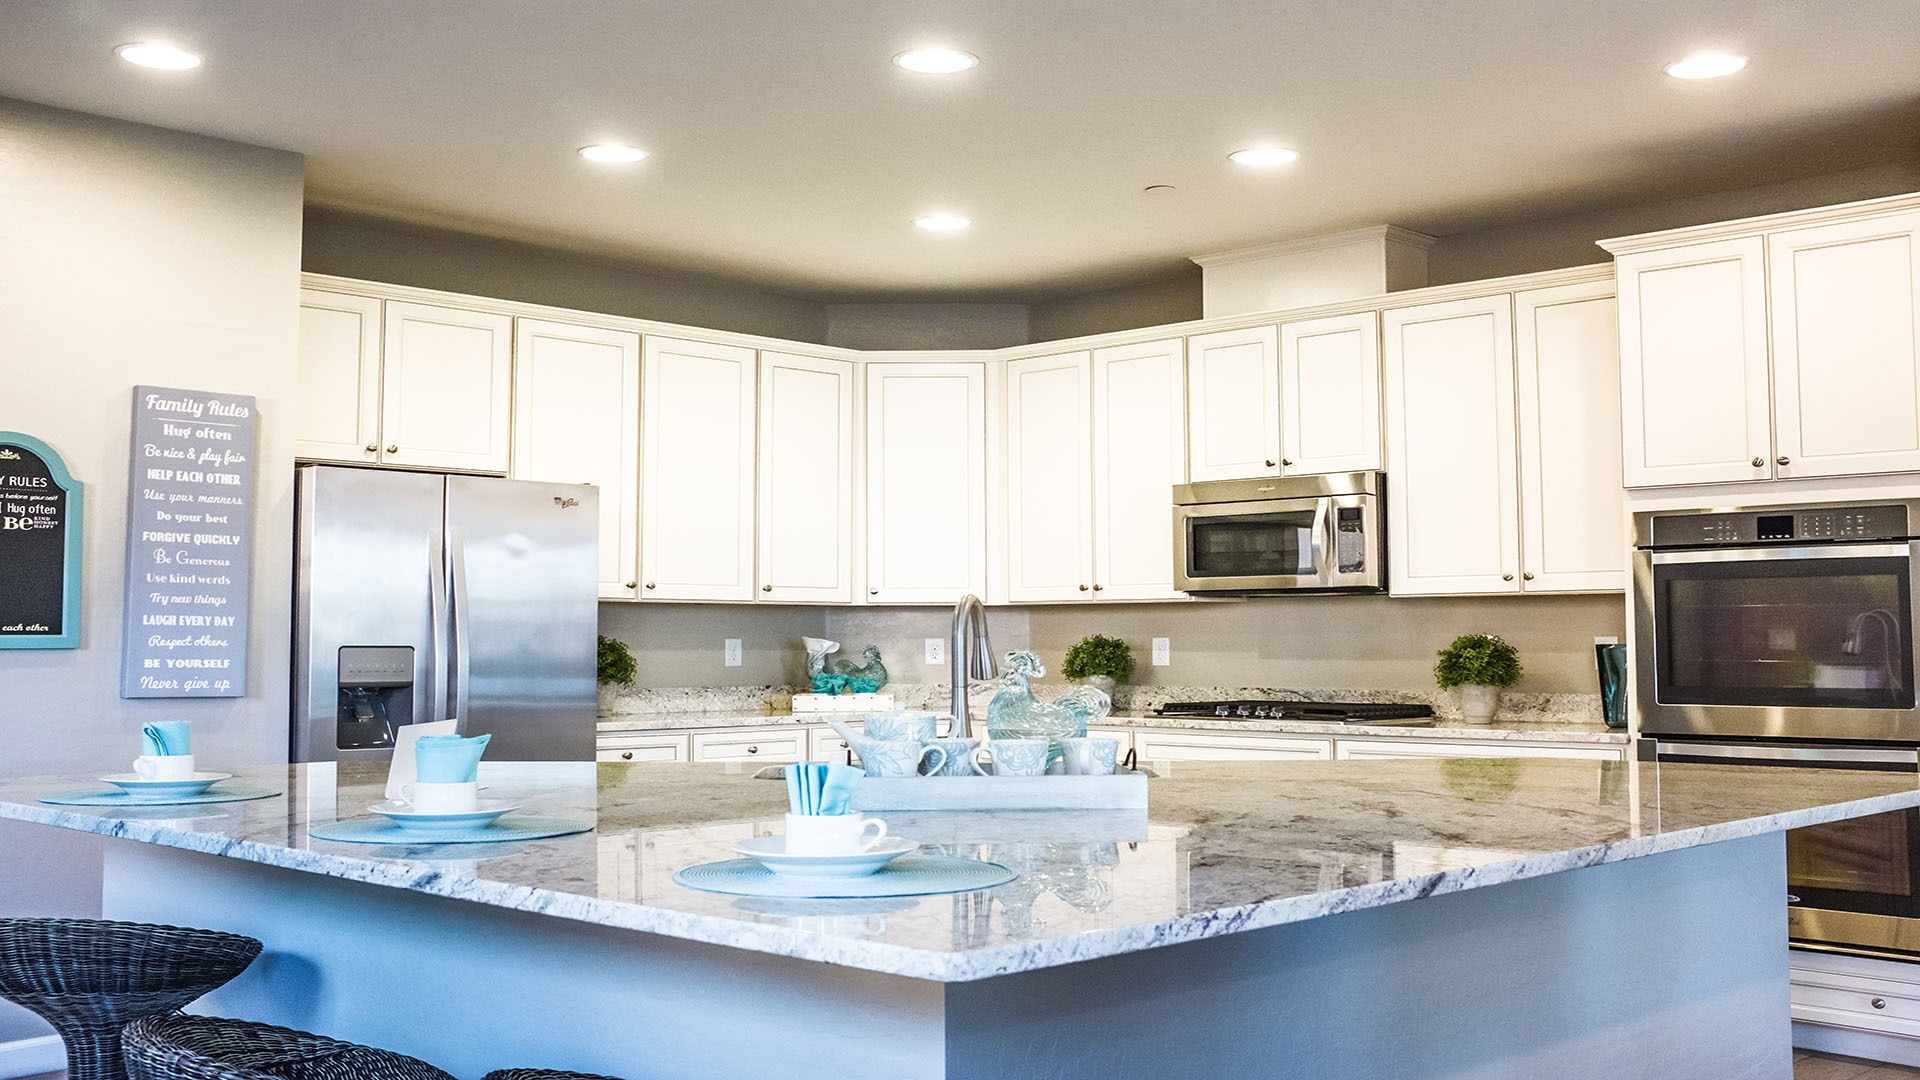 Top Rated Kitchen Remodeling Vancouver WA